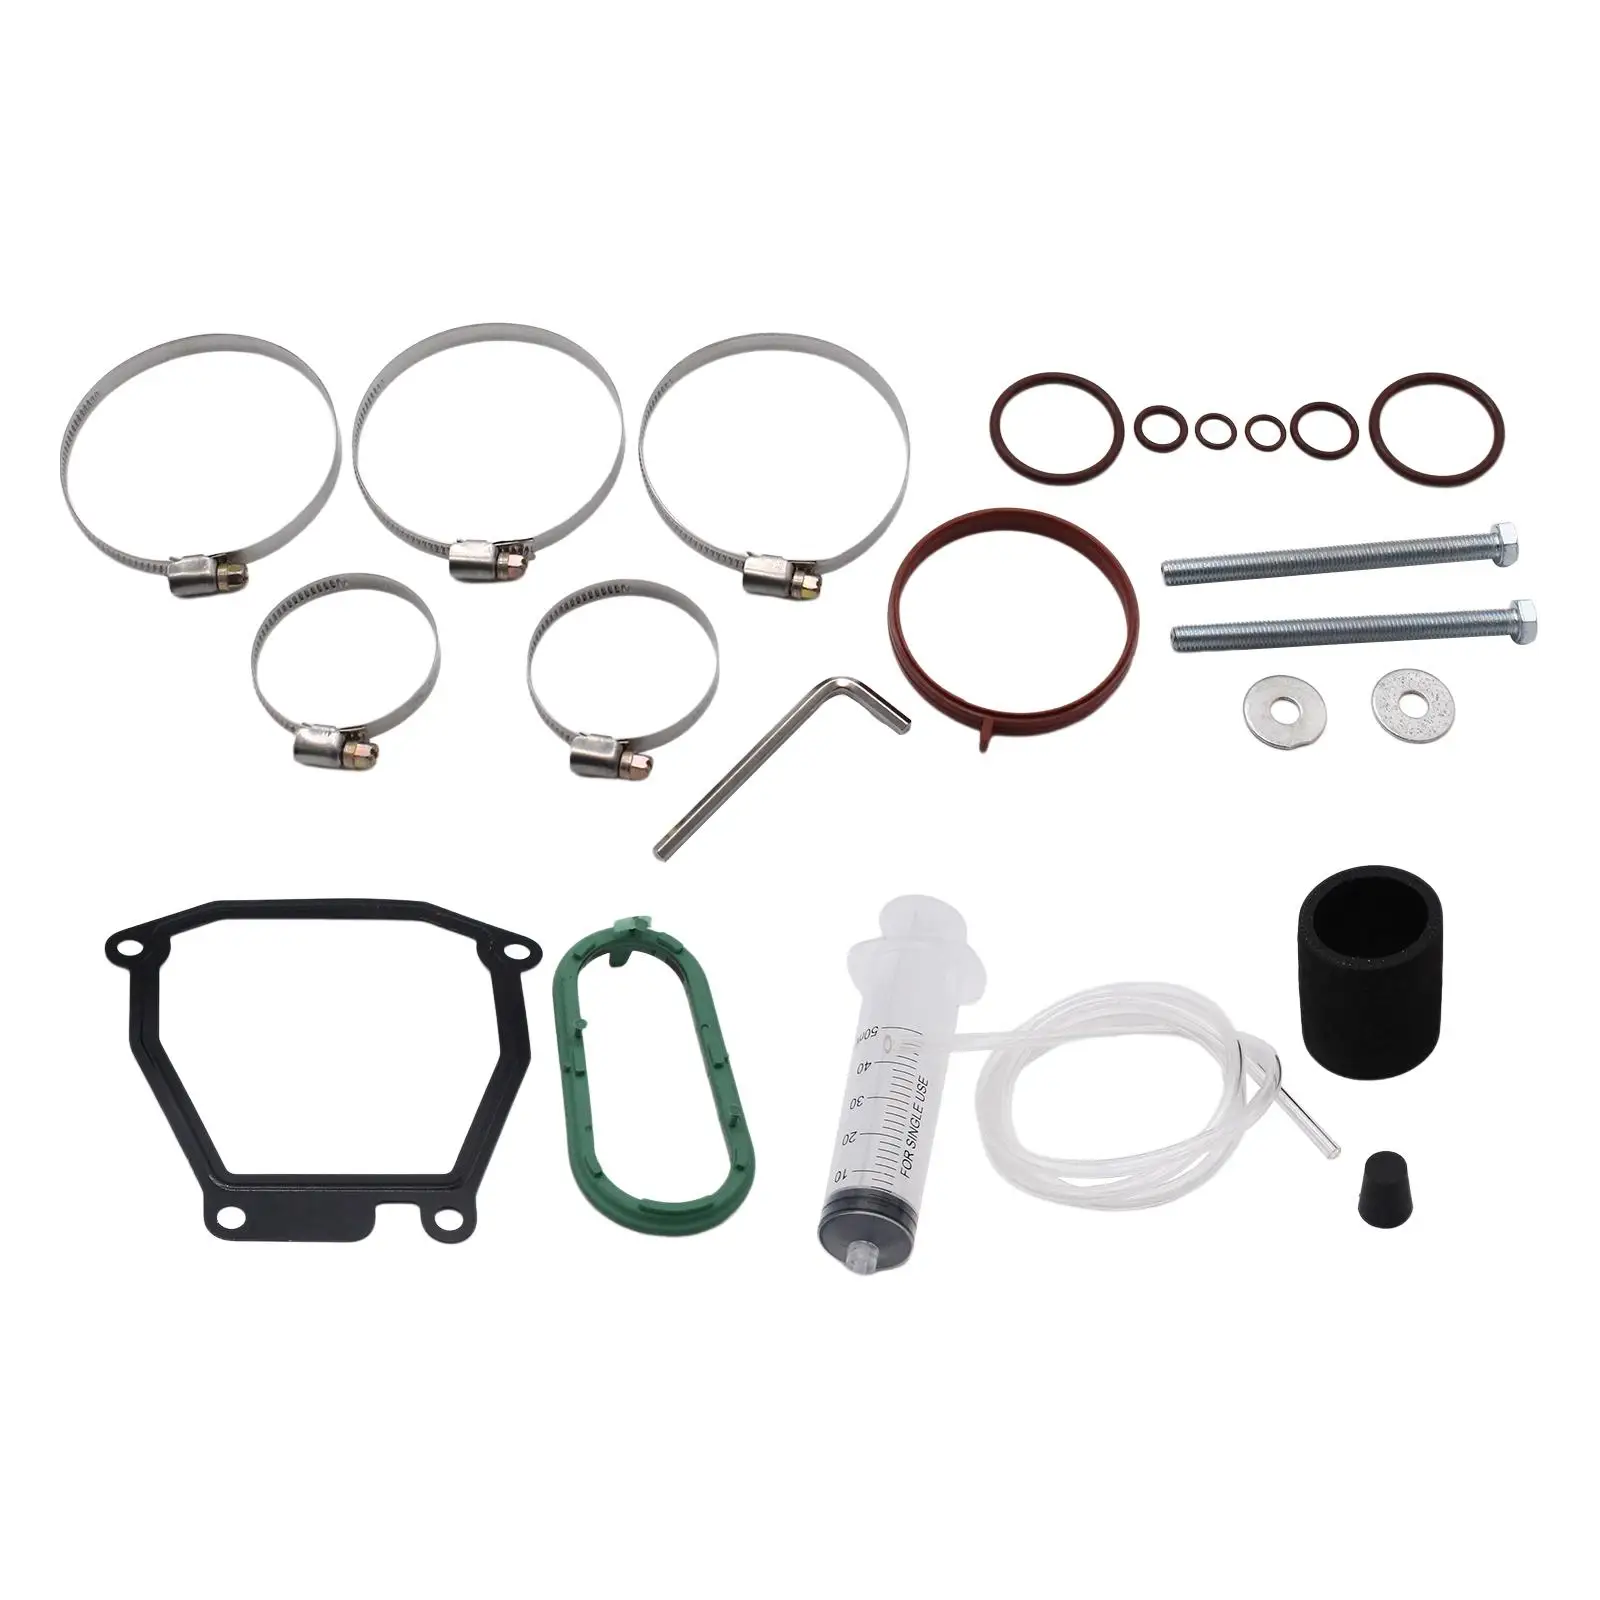 Car Car Supercharger Rebuild Kit Replaces for S R53 R52 High performance Parts Easy to Install Automotive